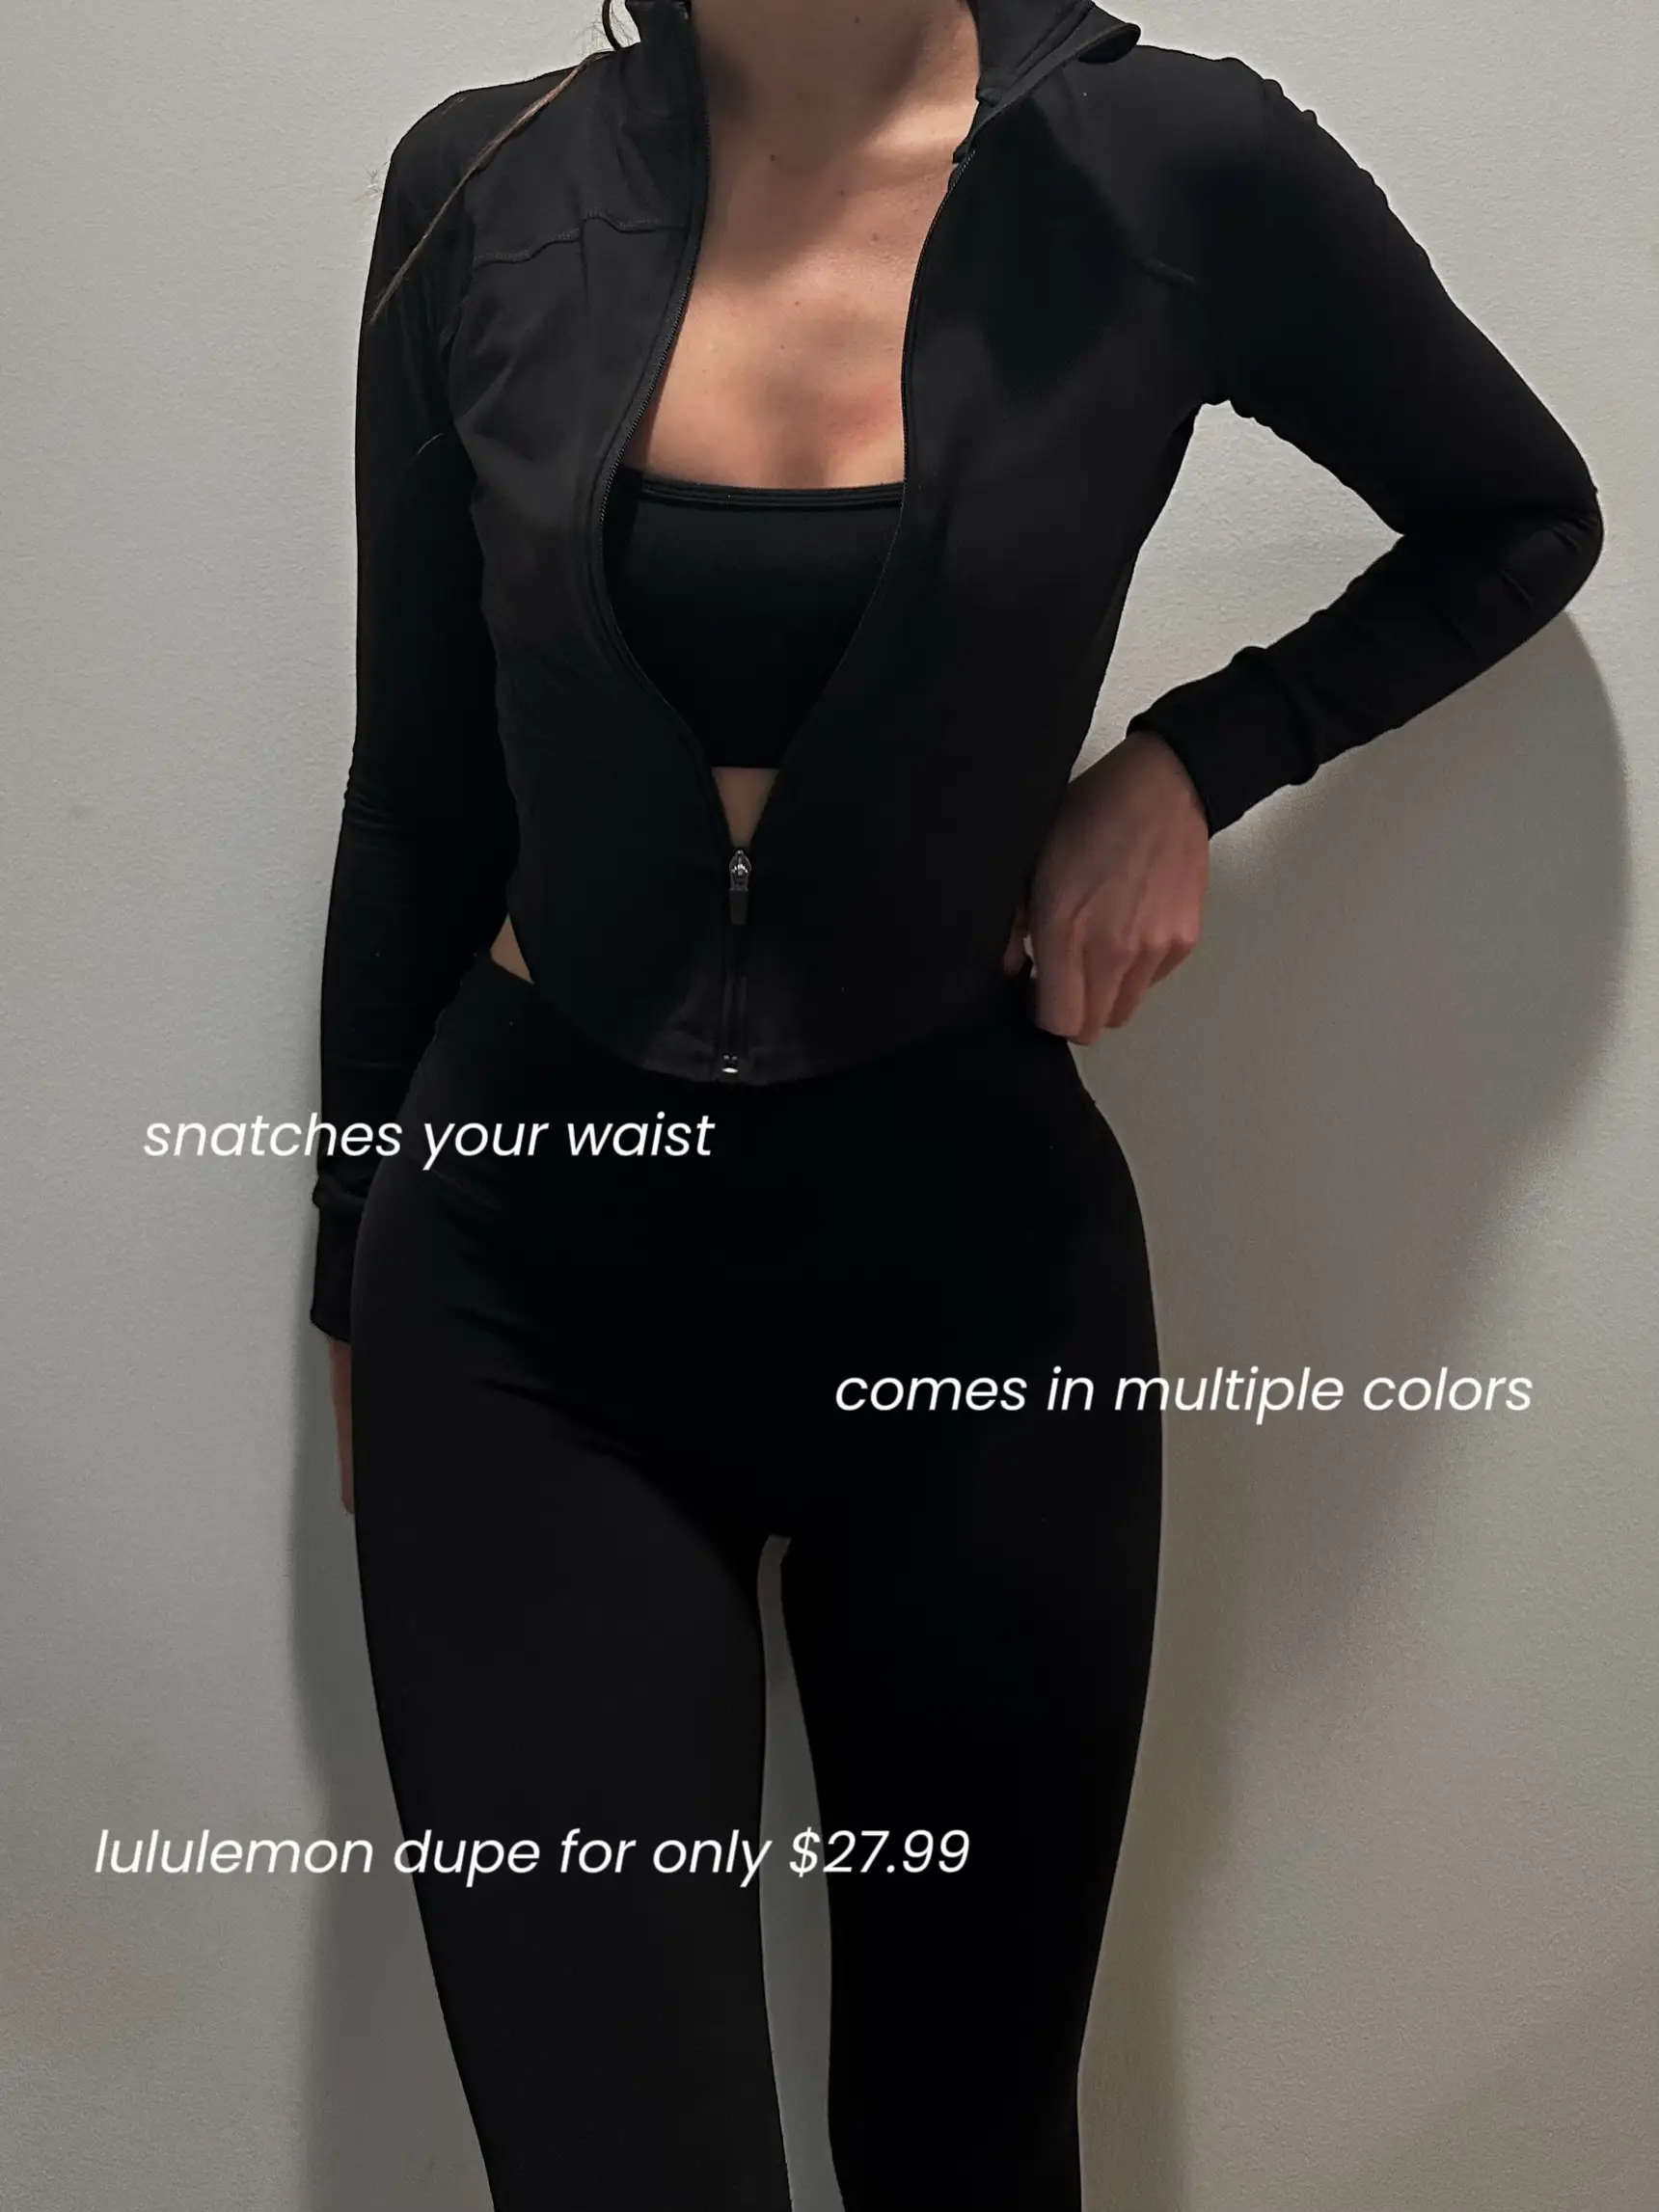 Lululemon scuba pants size guide 🖤, Gallery posted by Cait 🧚🏻‍♀️